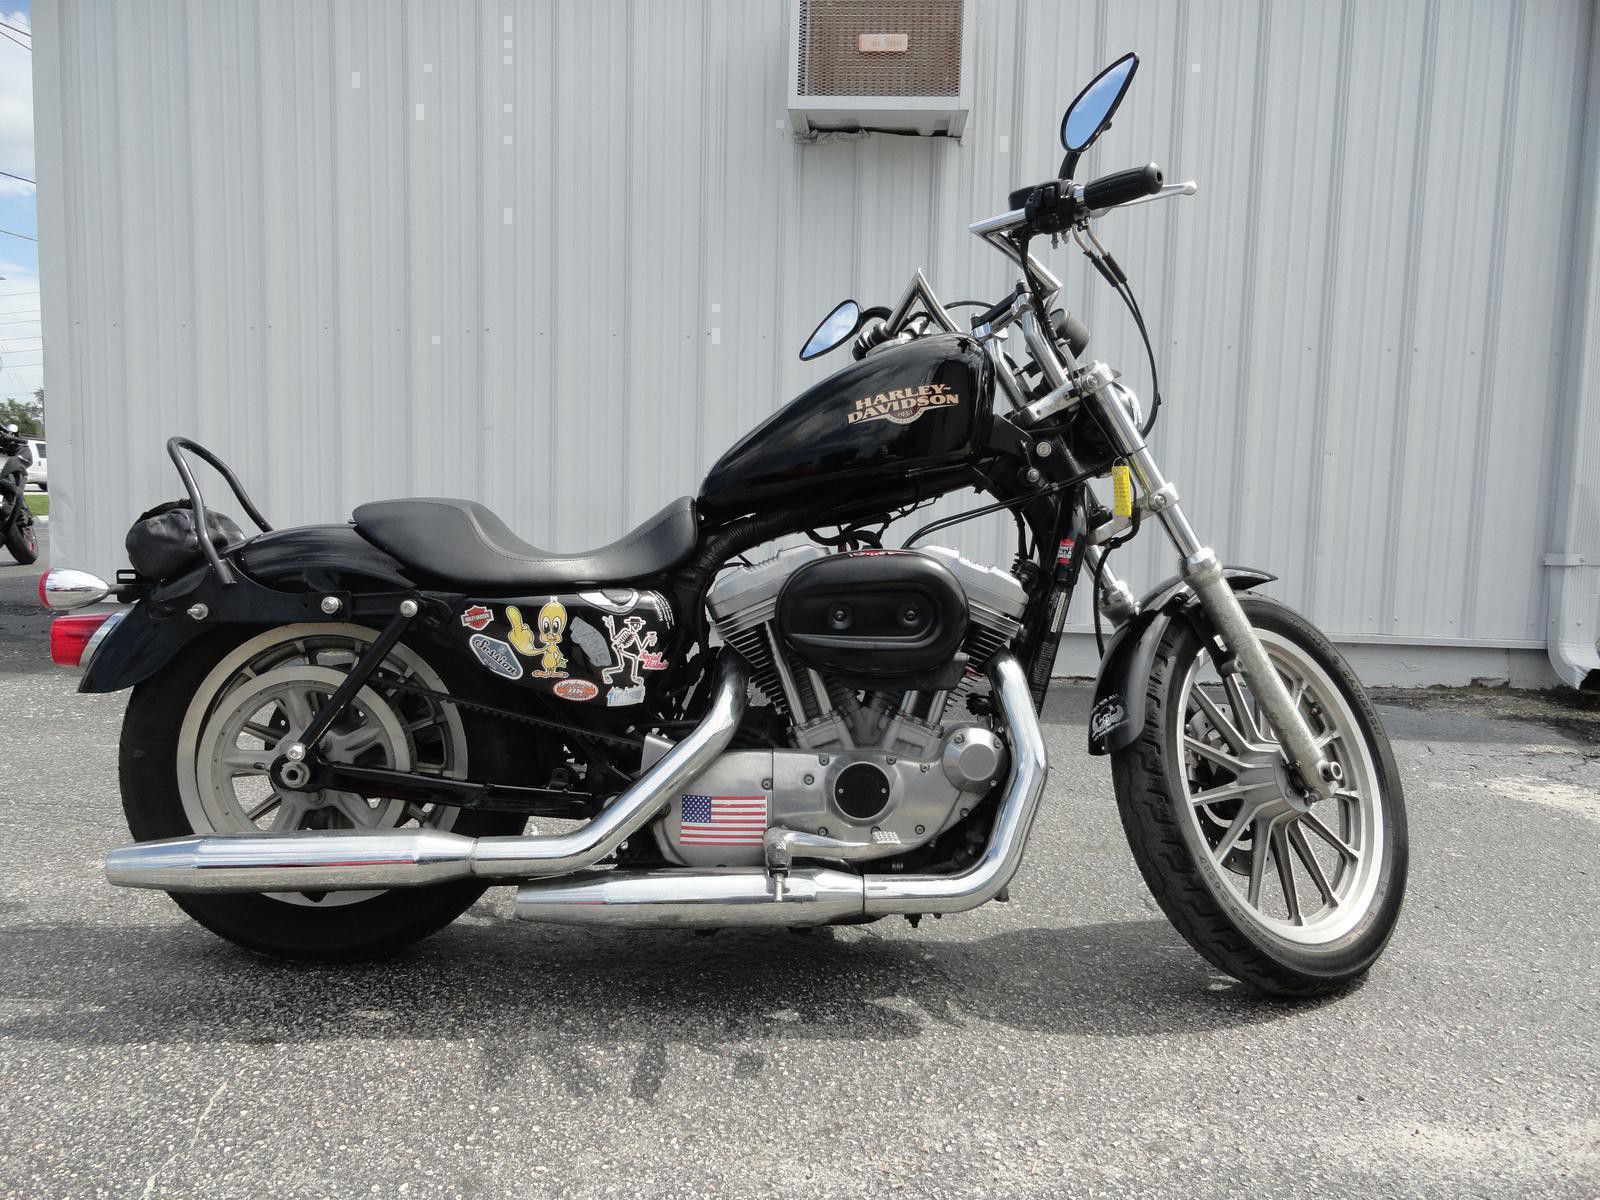 2008 HARLEY Sportster 883 super low, financing and warranty